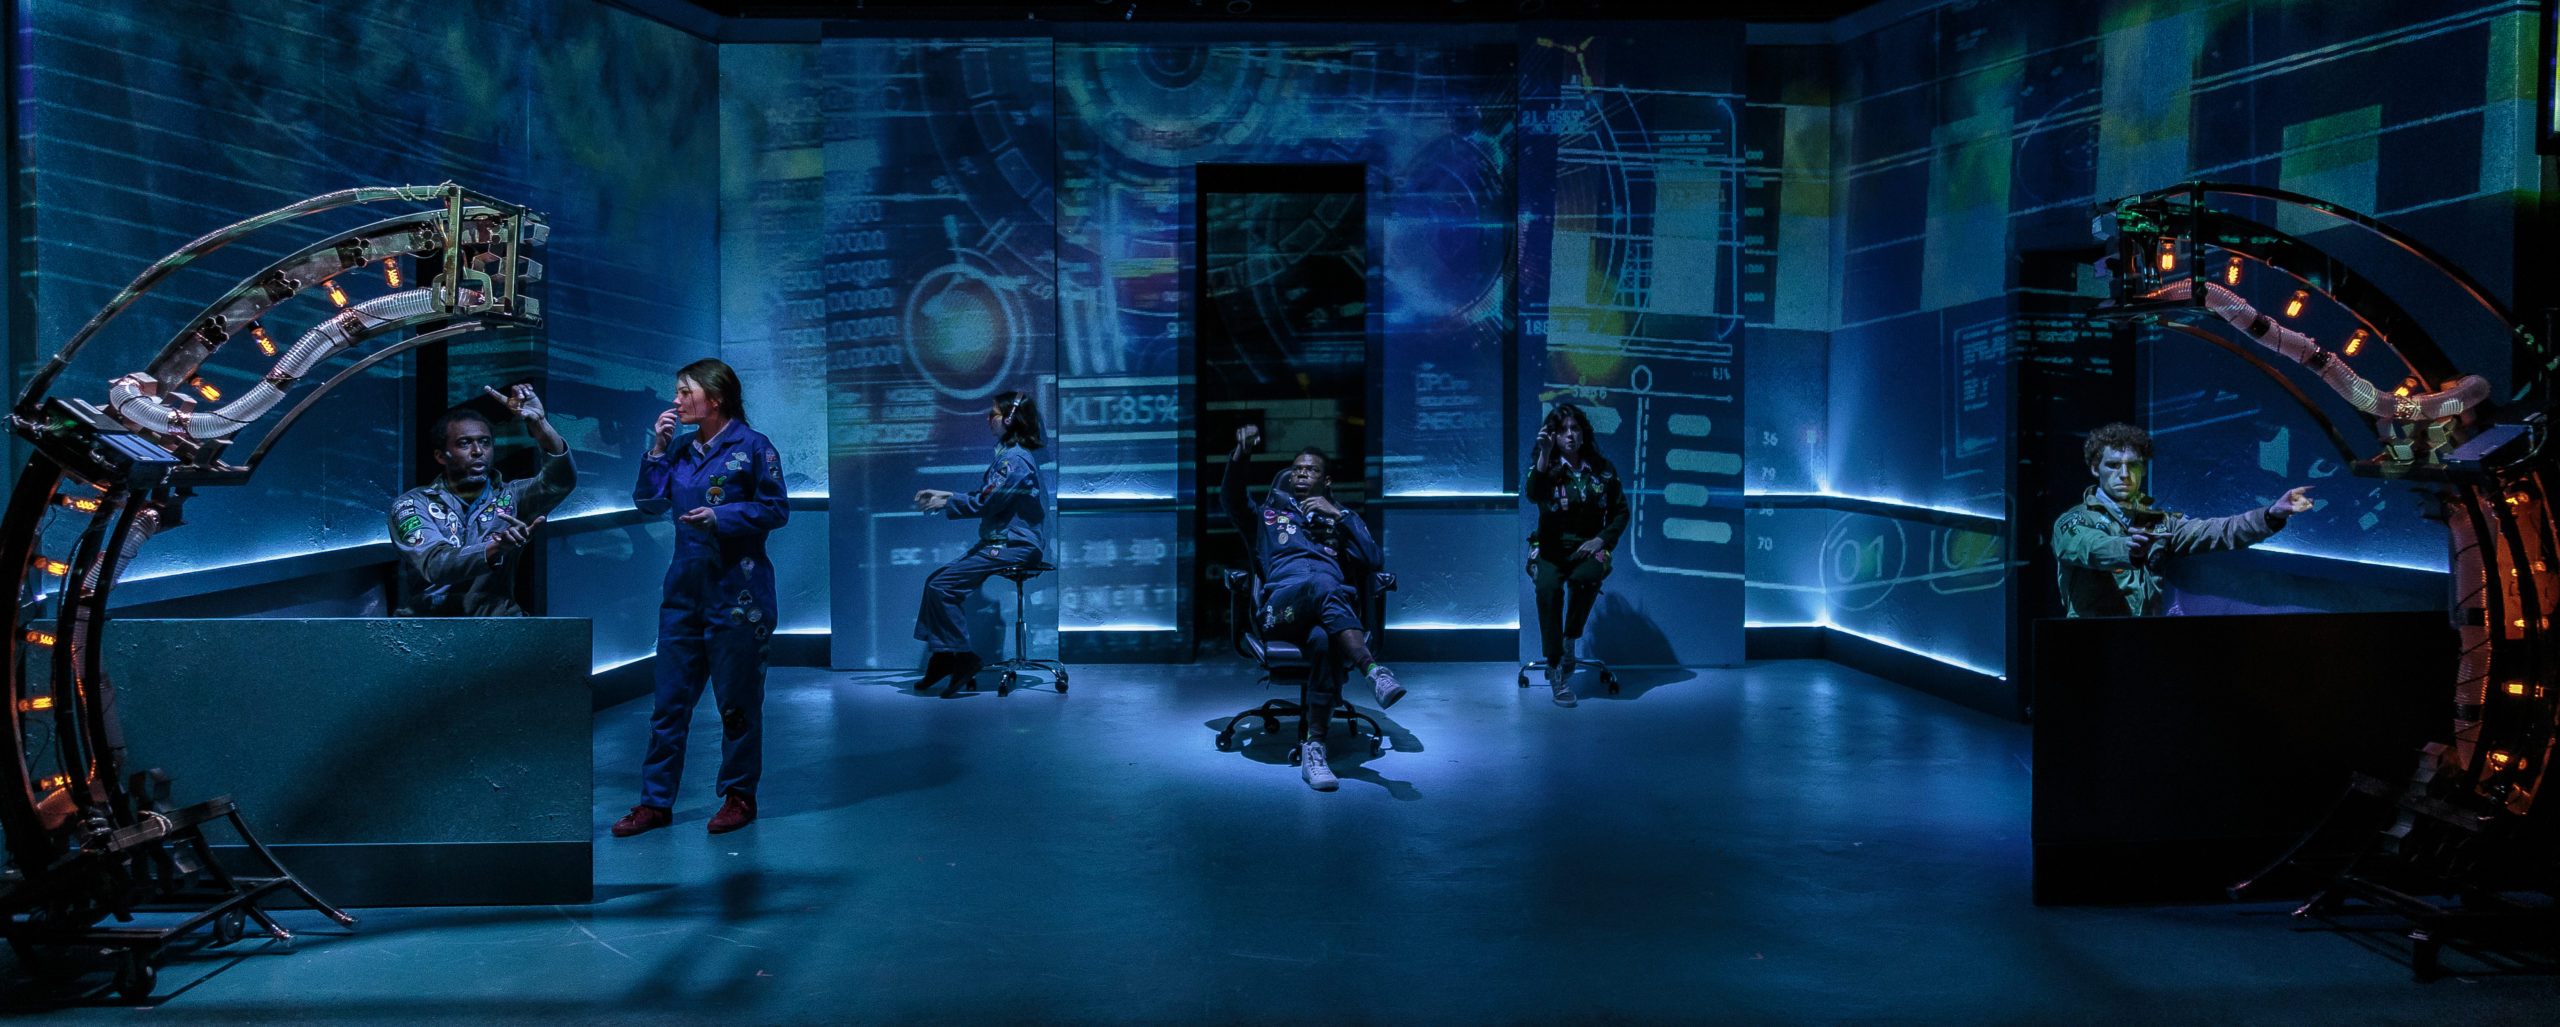 REVIEW: So Much Energy in 'The Light Chasers' at Know Theatre of ...